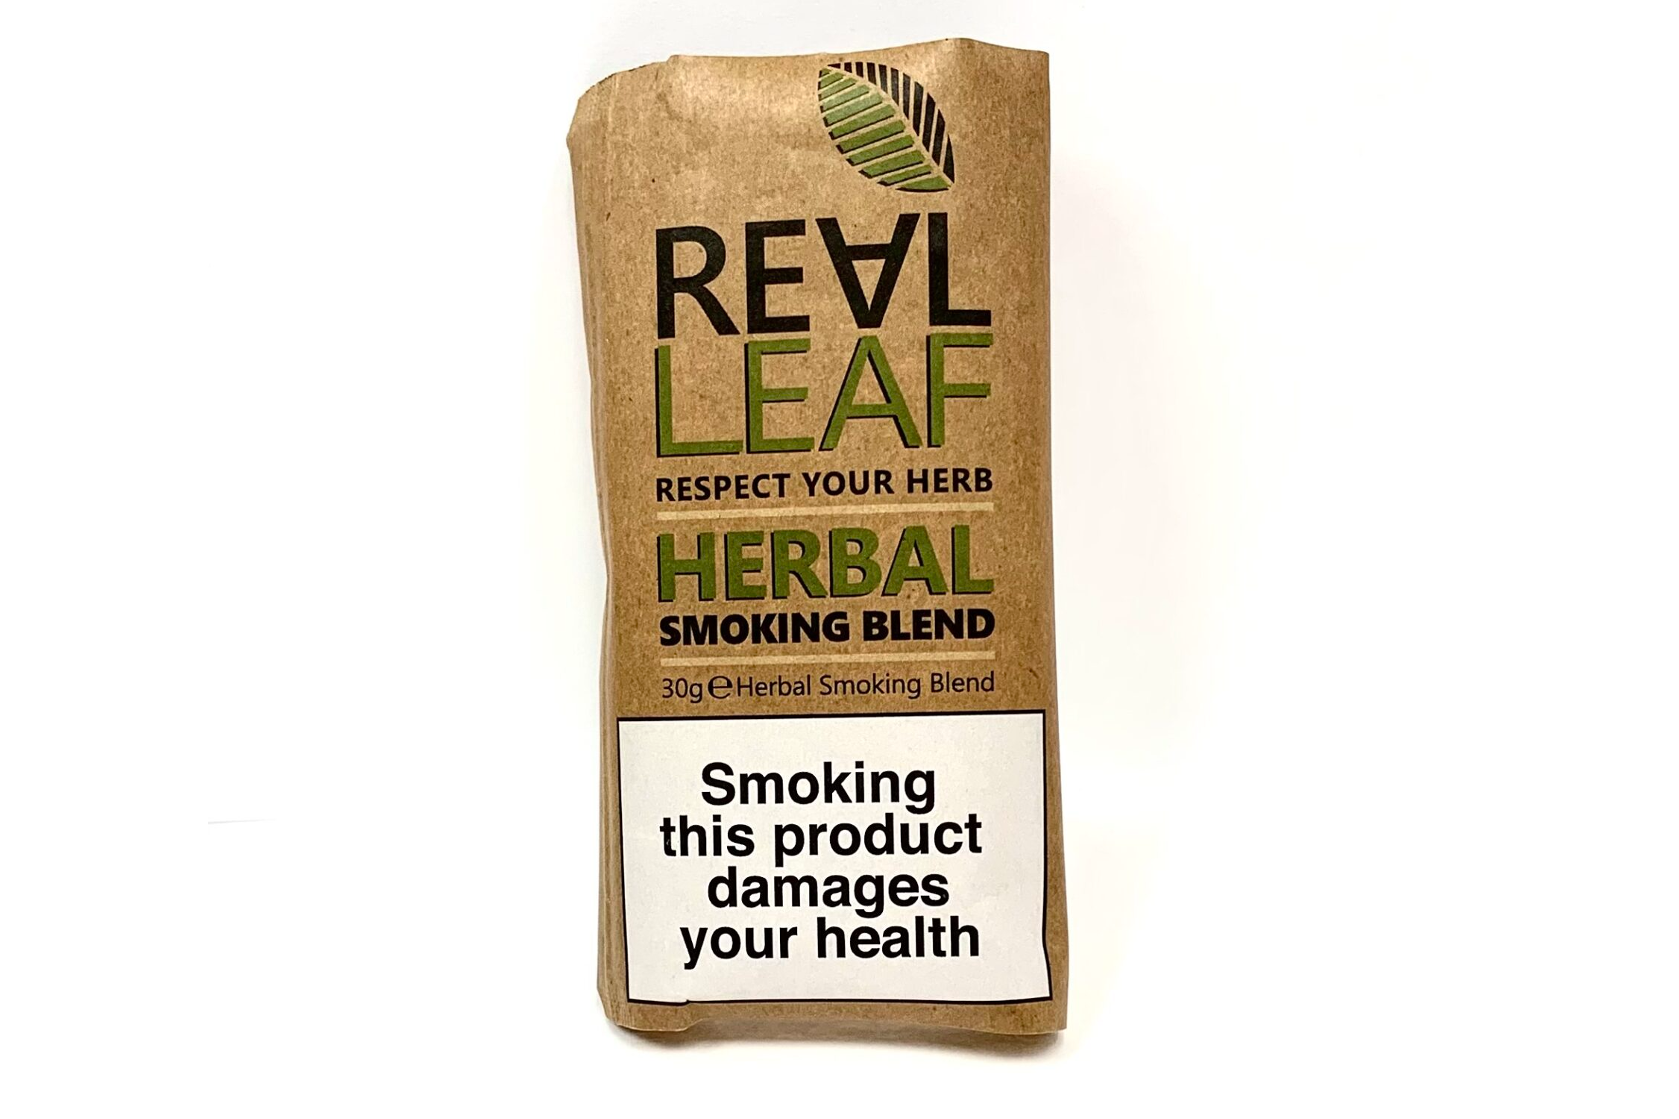 Real Leaf Herbal Smoking Blend Pouch 30g